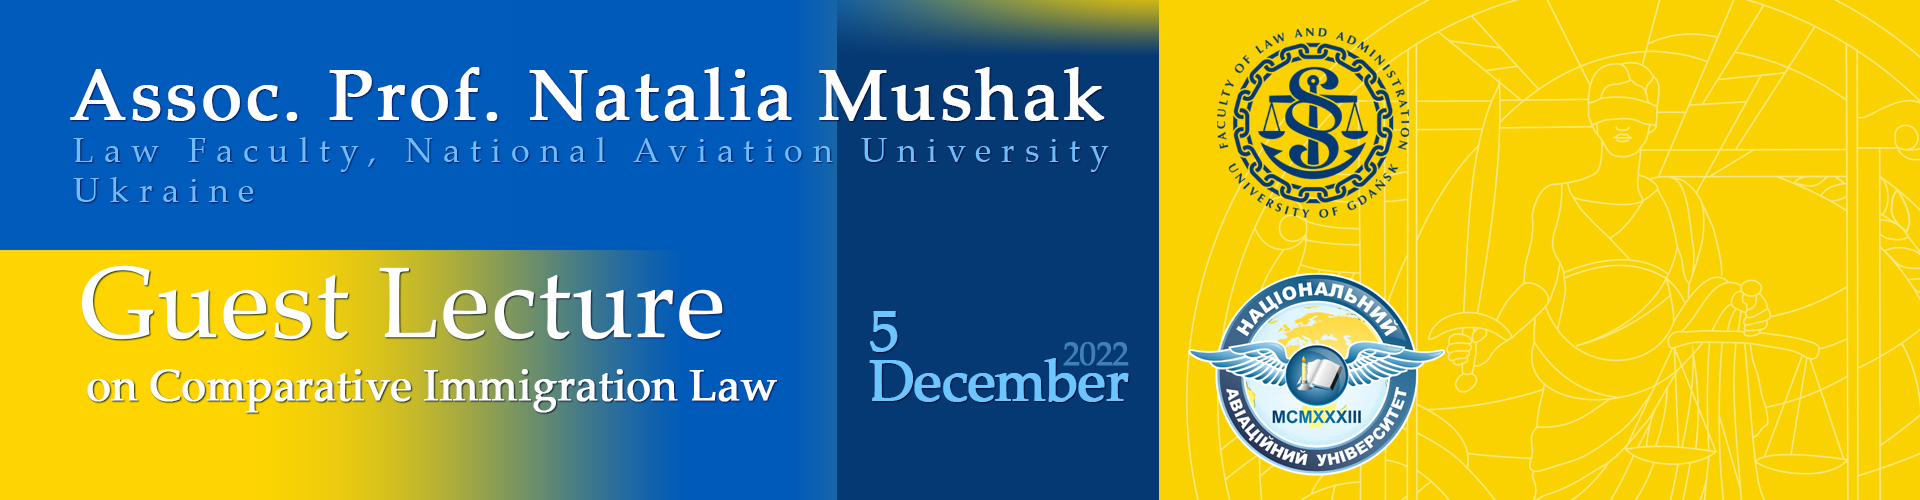 Guest Lectures on Comparative Immigration Law by Assoc. Prof. Natalia Mushak